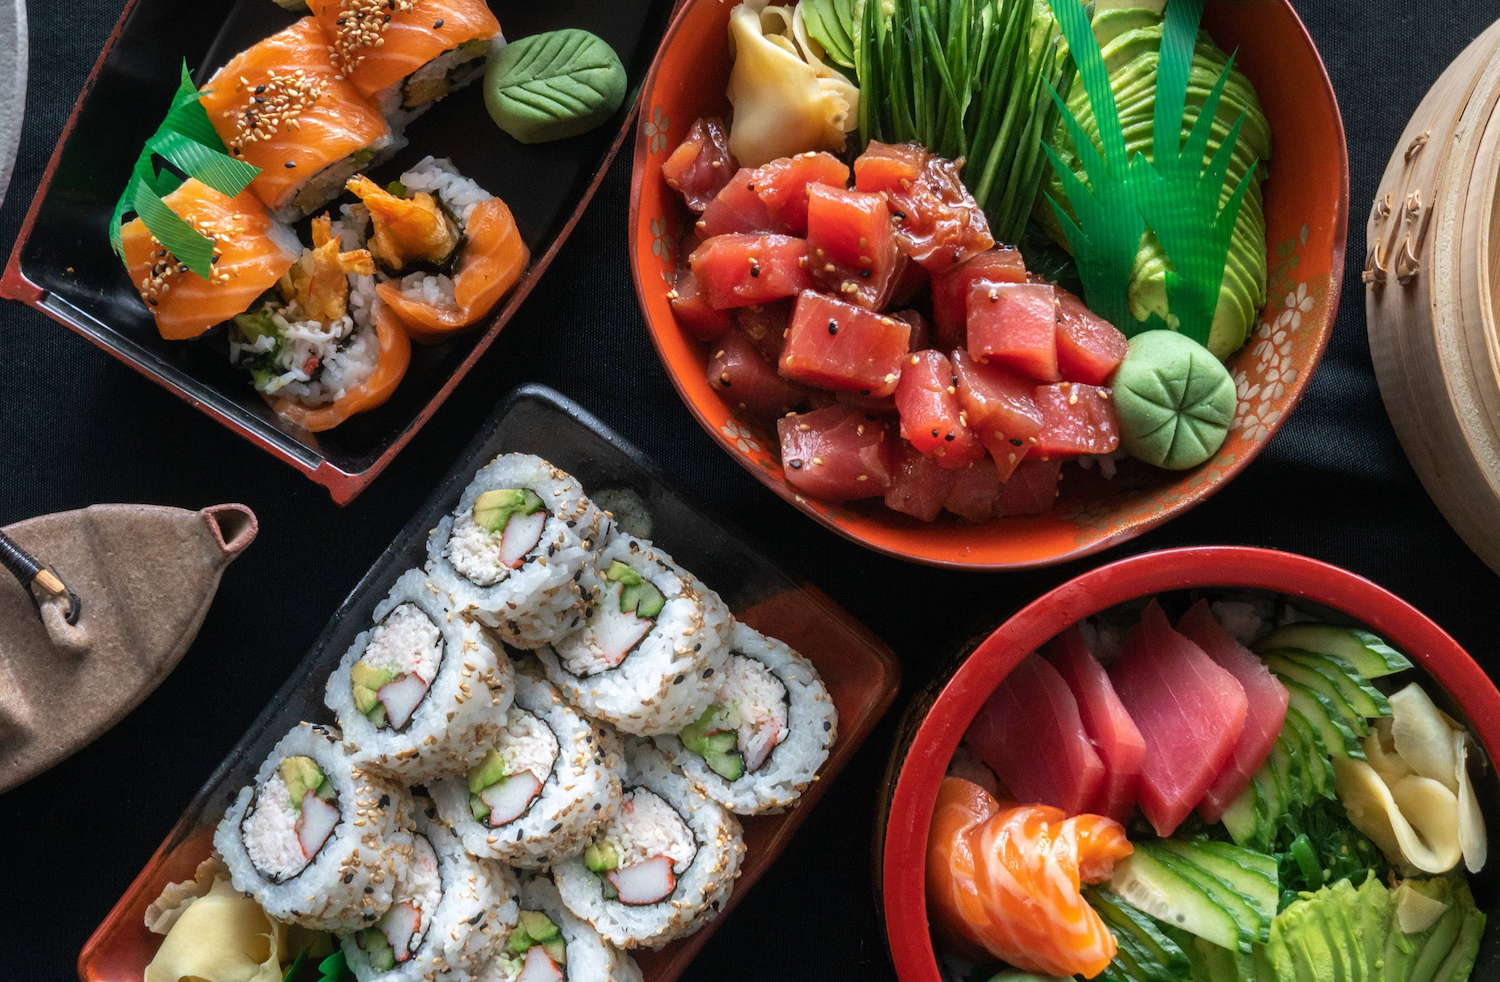 South Bay San Diego sushi and poke restaurant located in National City featuring a platter of sushi rolls, raw fish, and appetizers